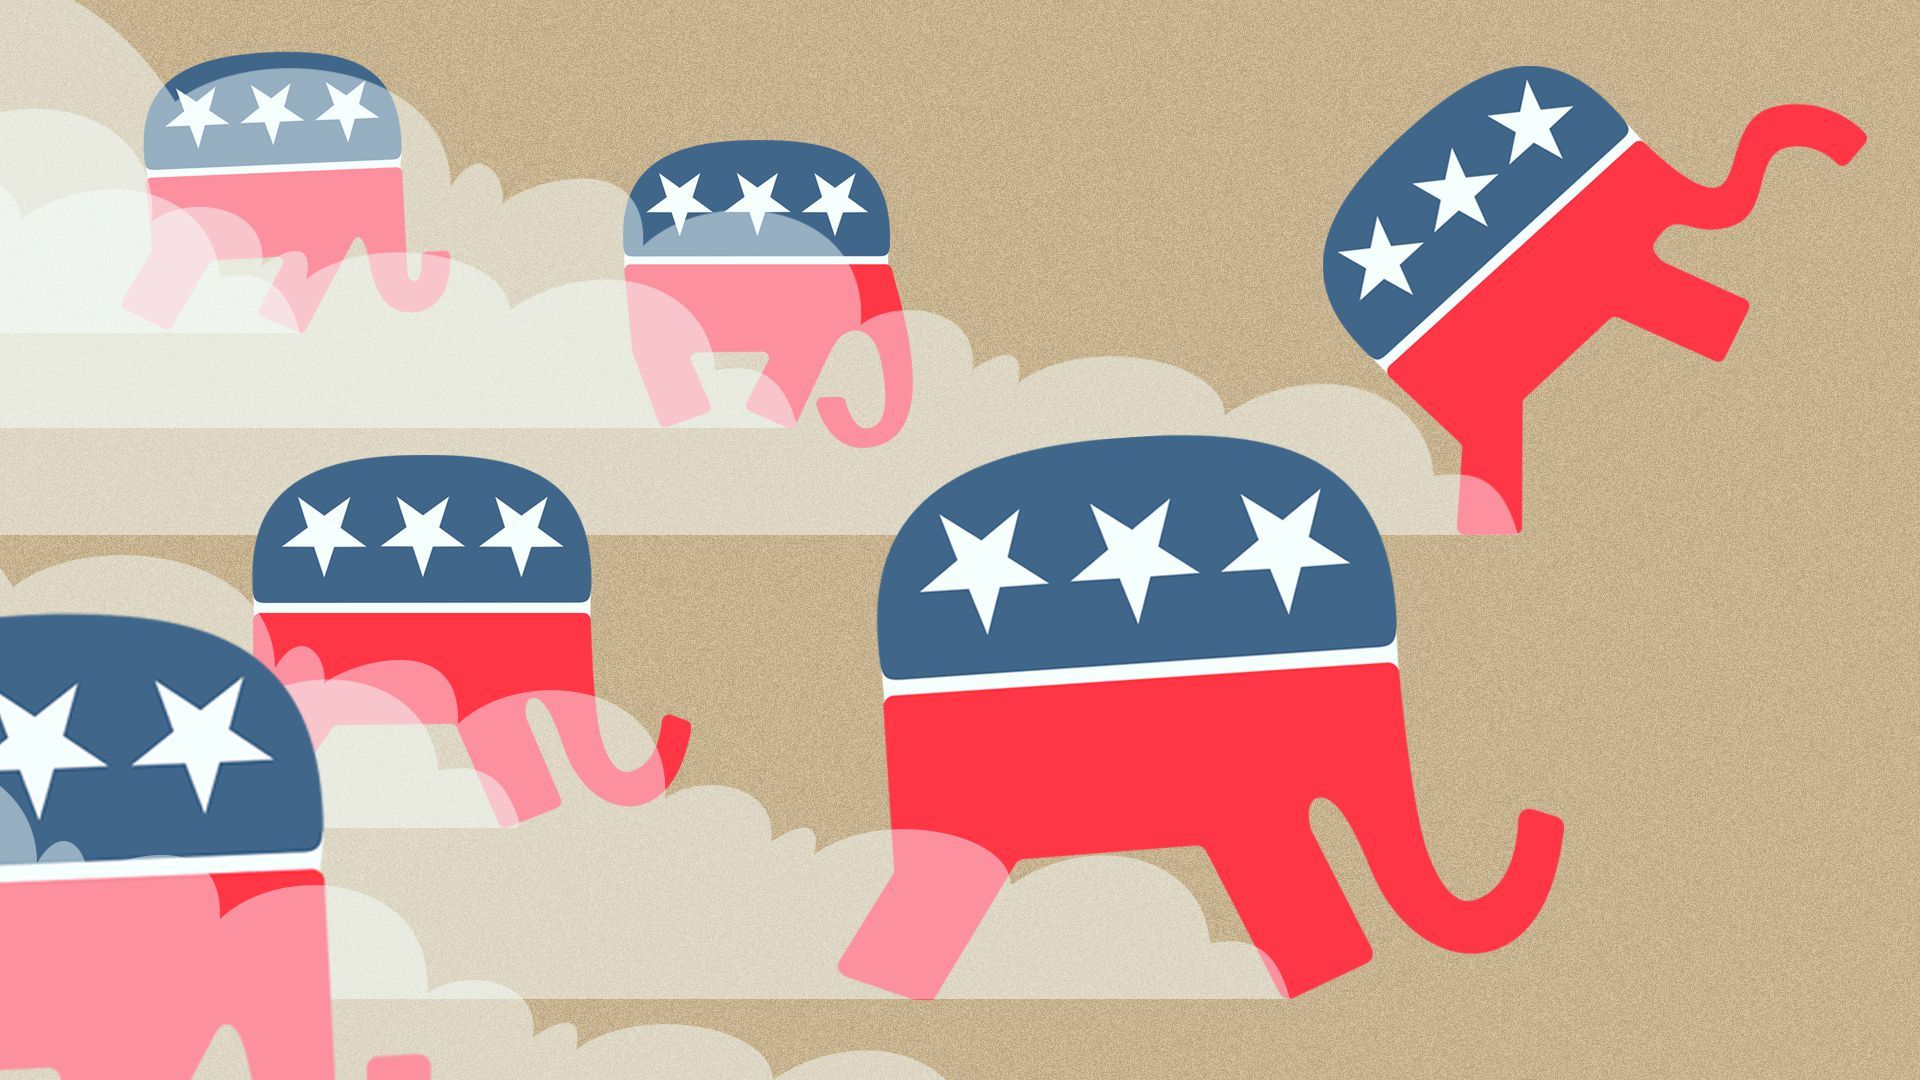 Illustration of several versions of the elephant from the Republican Party logo stampeding and kicking up dust.